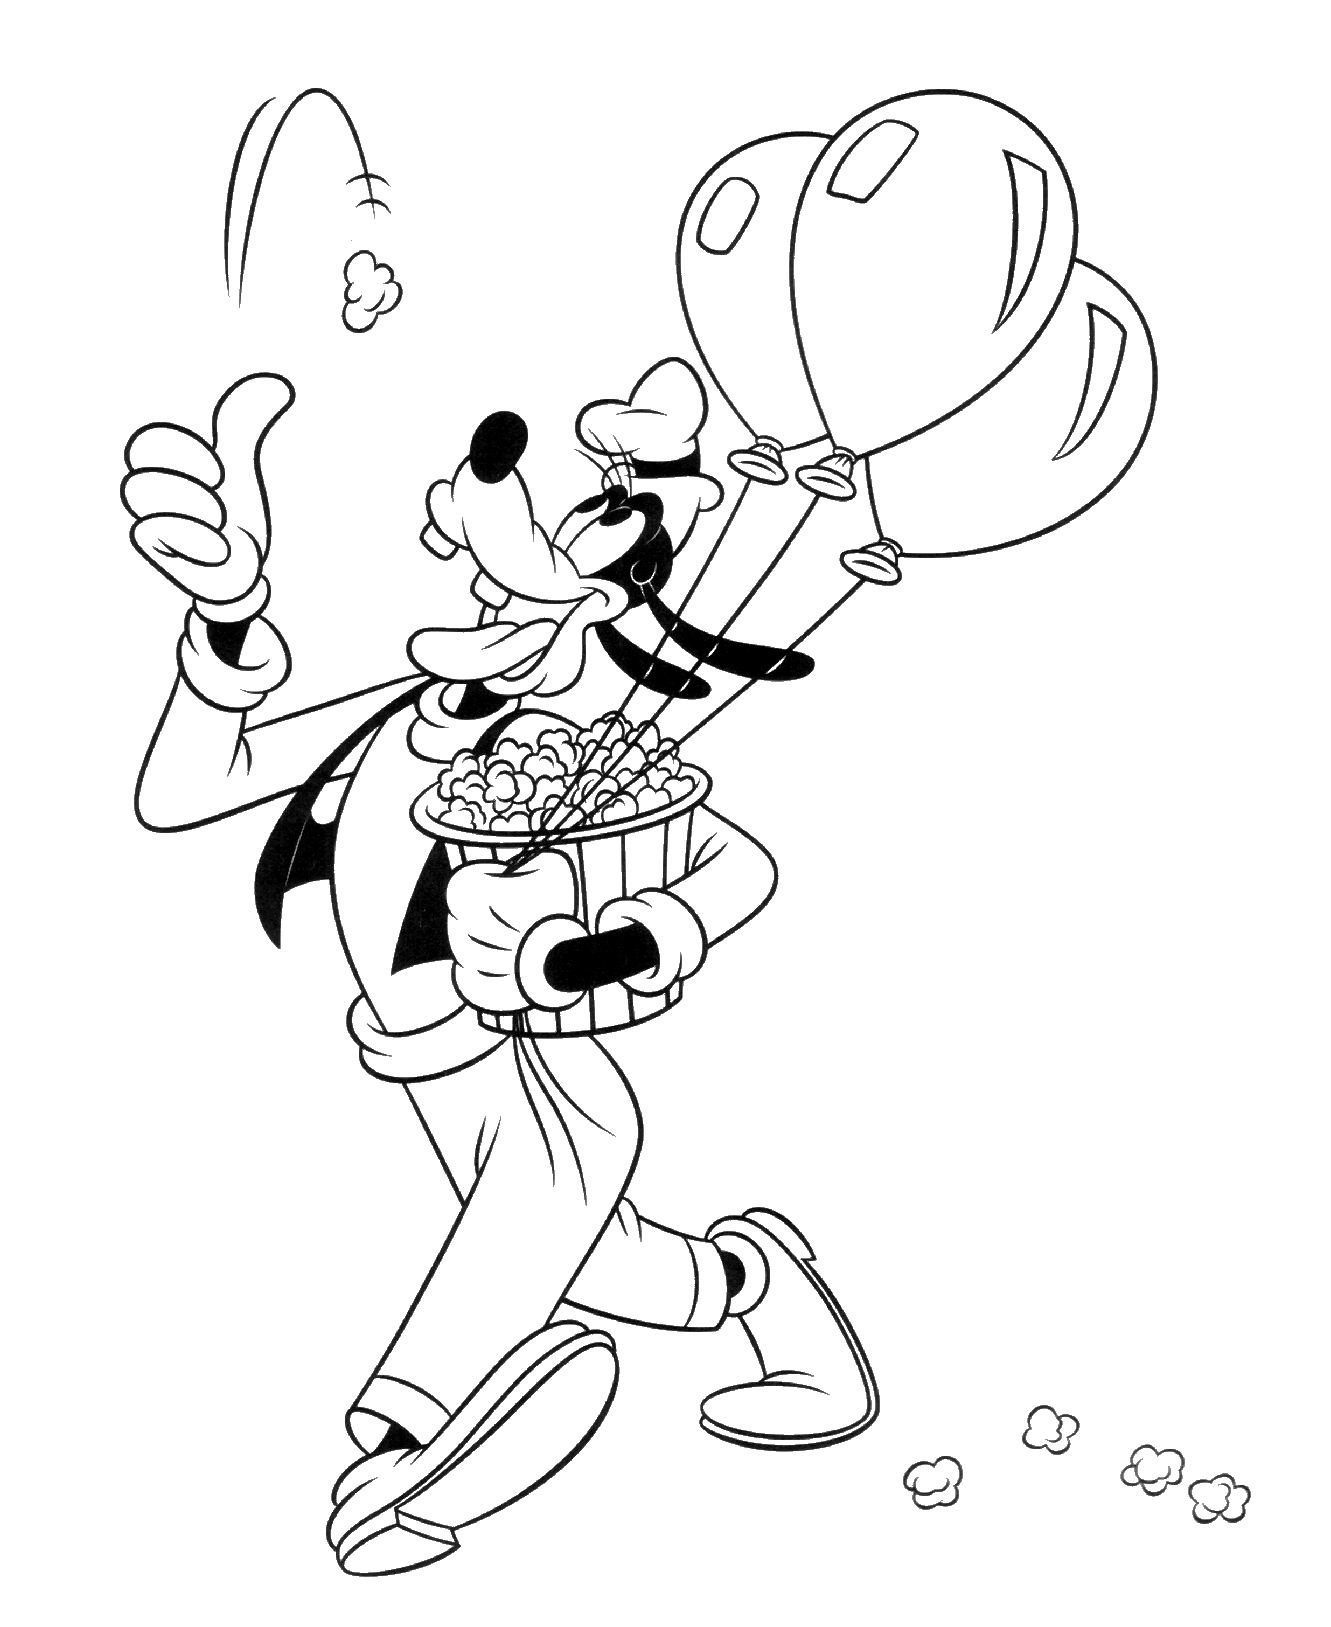 Goofy Coloring Pages For Kids - Free Printable Coloring Pages Goofy